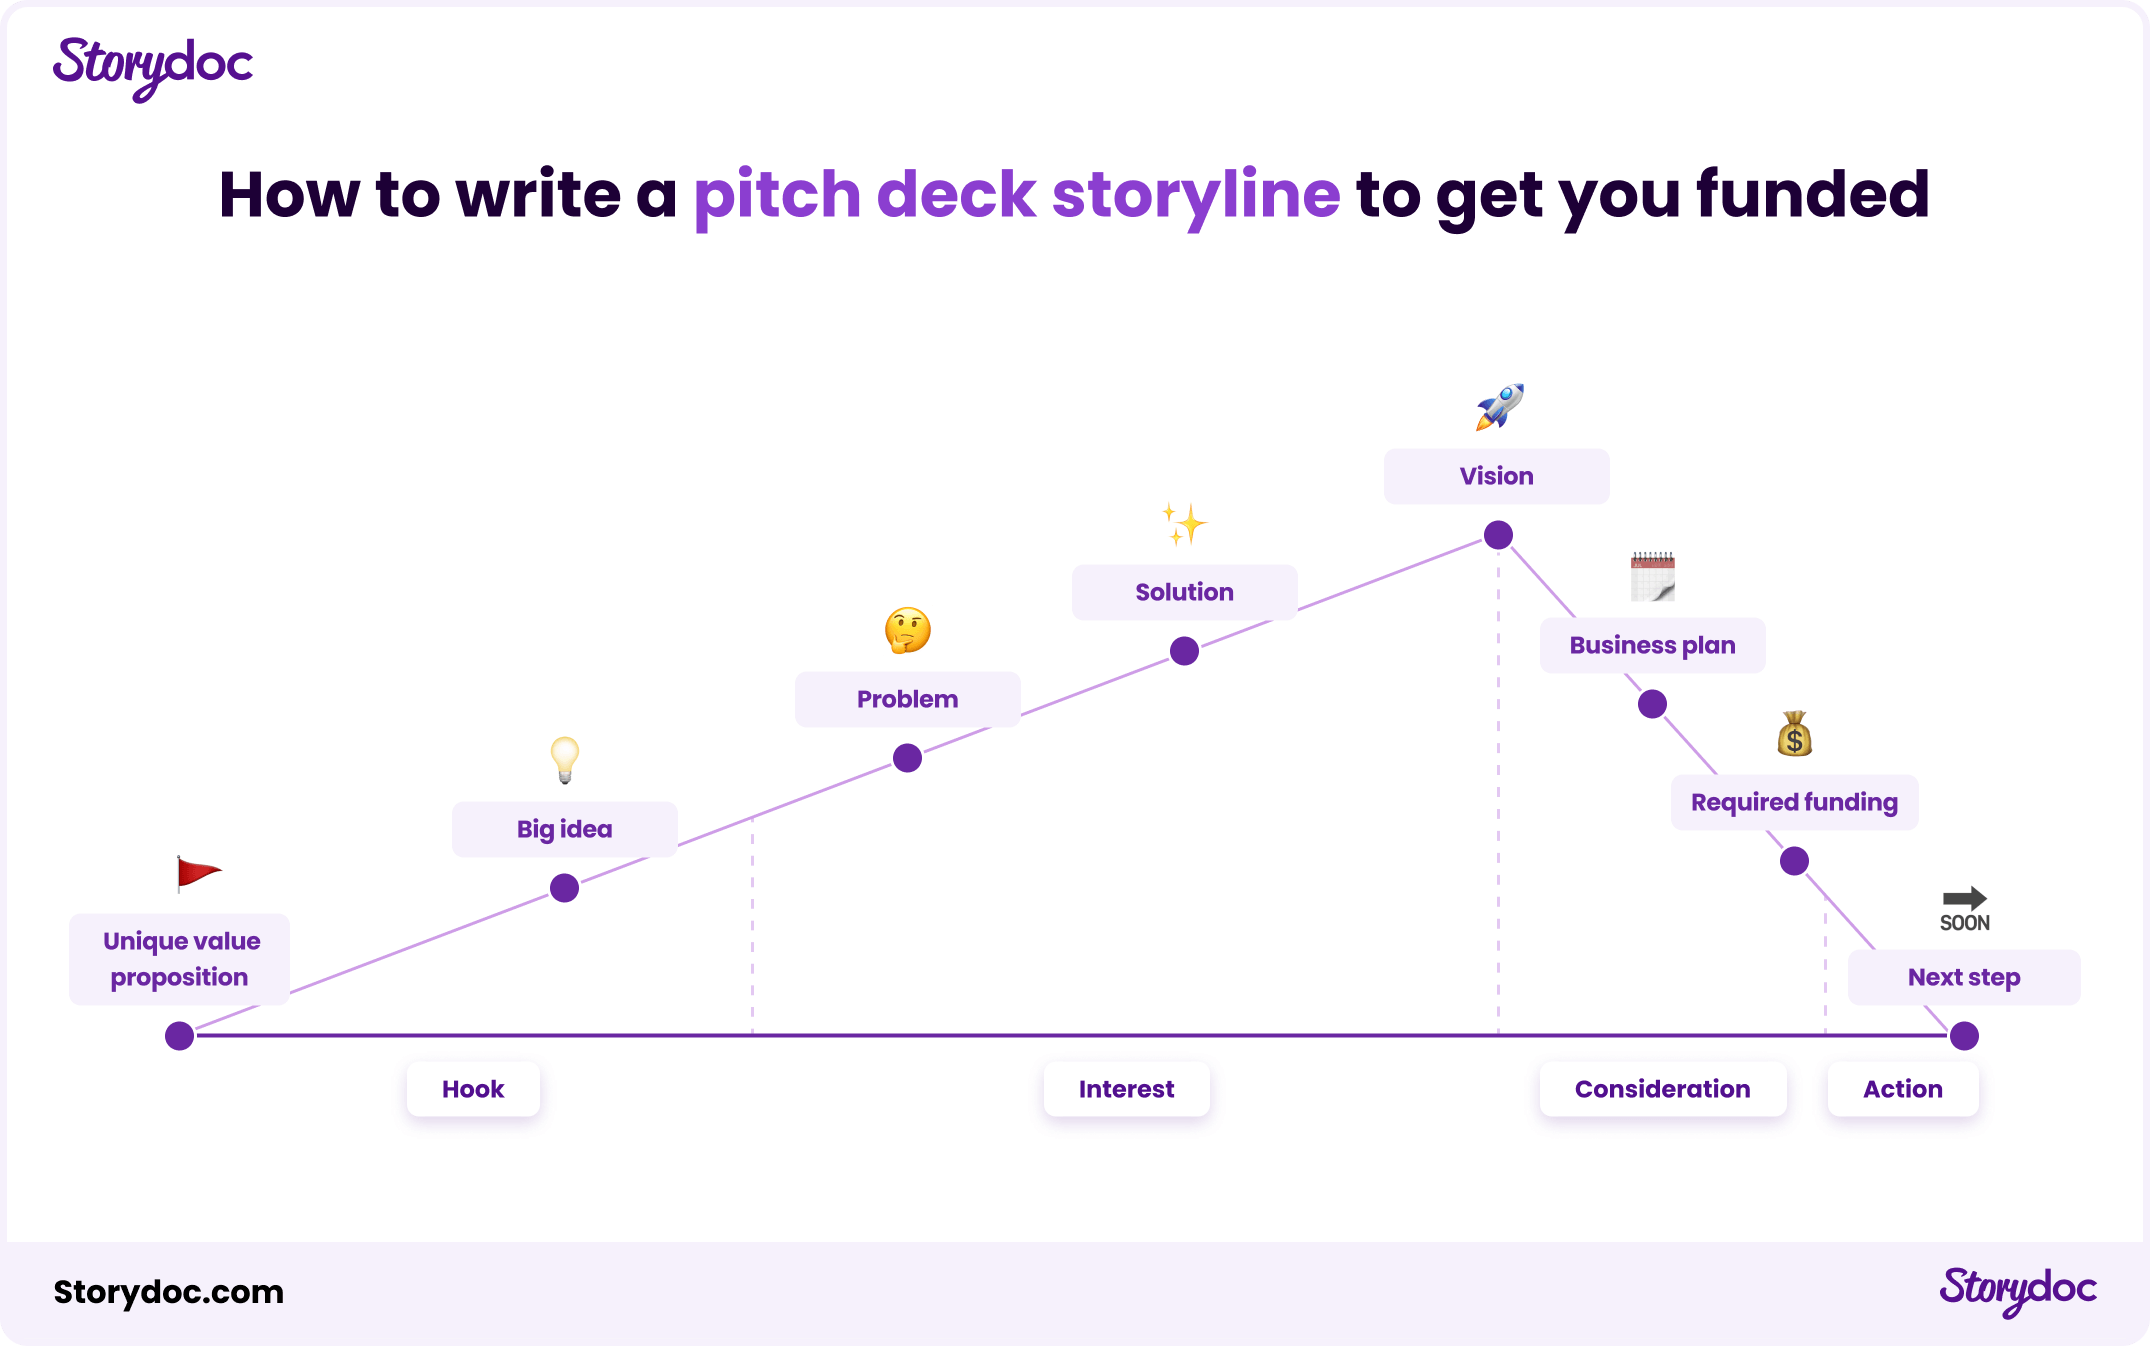 Recommended pitch deck storyline